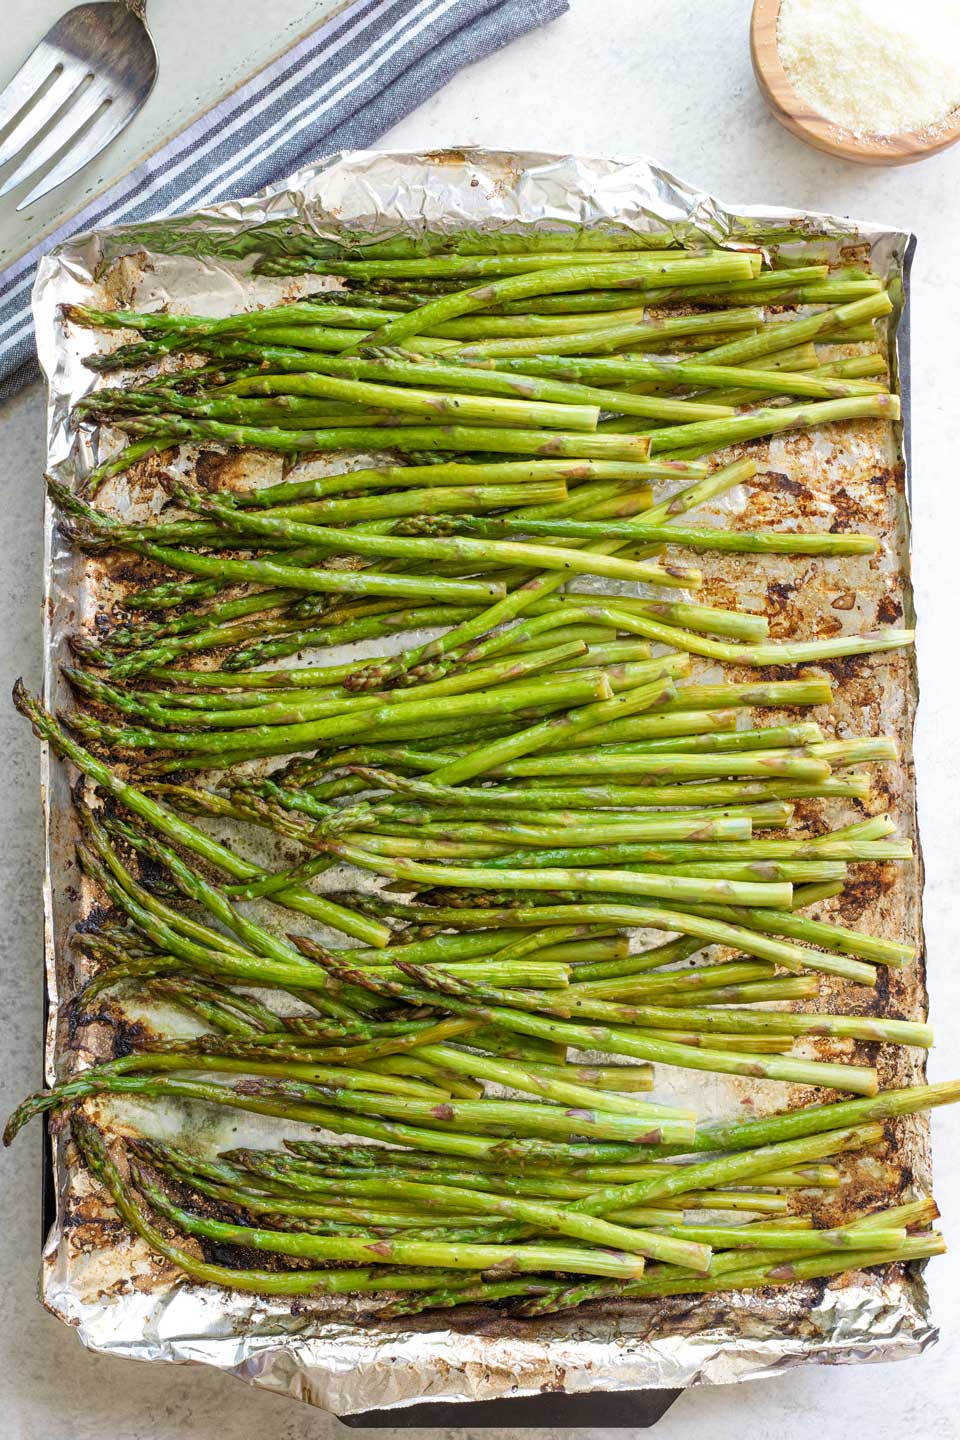 Overhead of asparagus still on pan after grilling, bowl of parmesan and serving platter nearby.